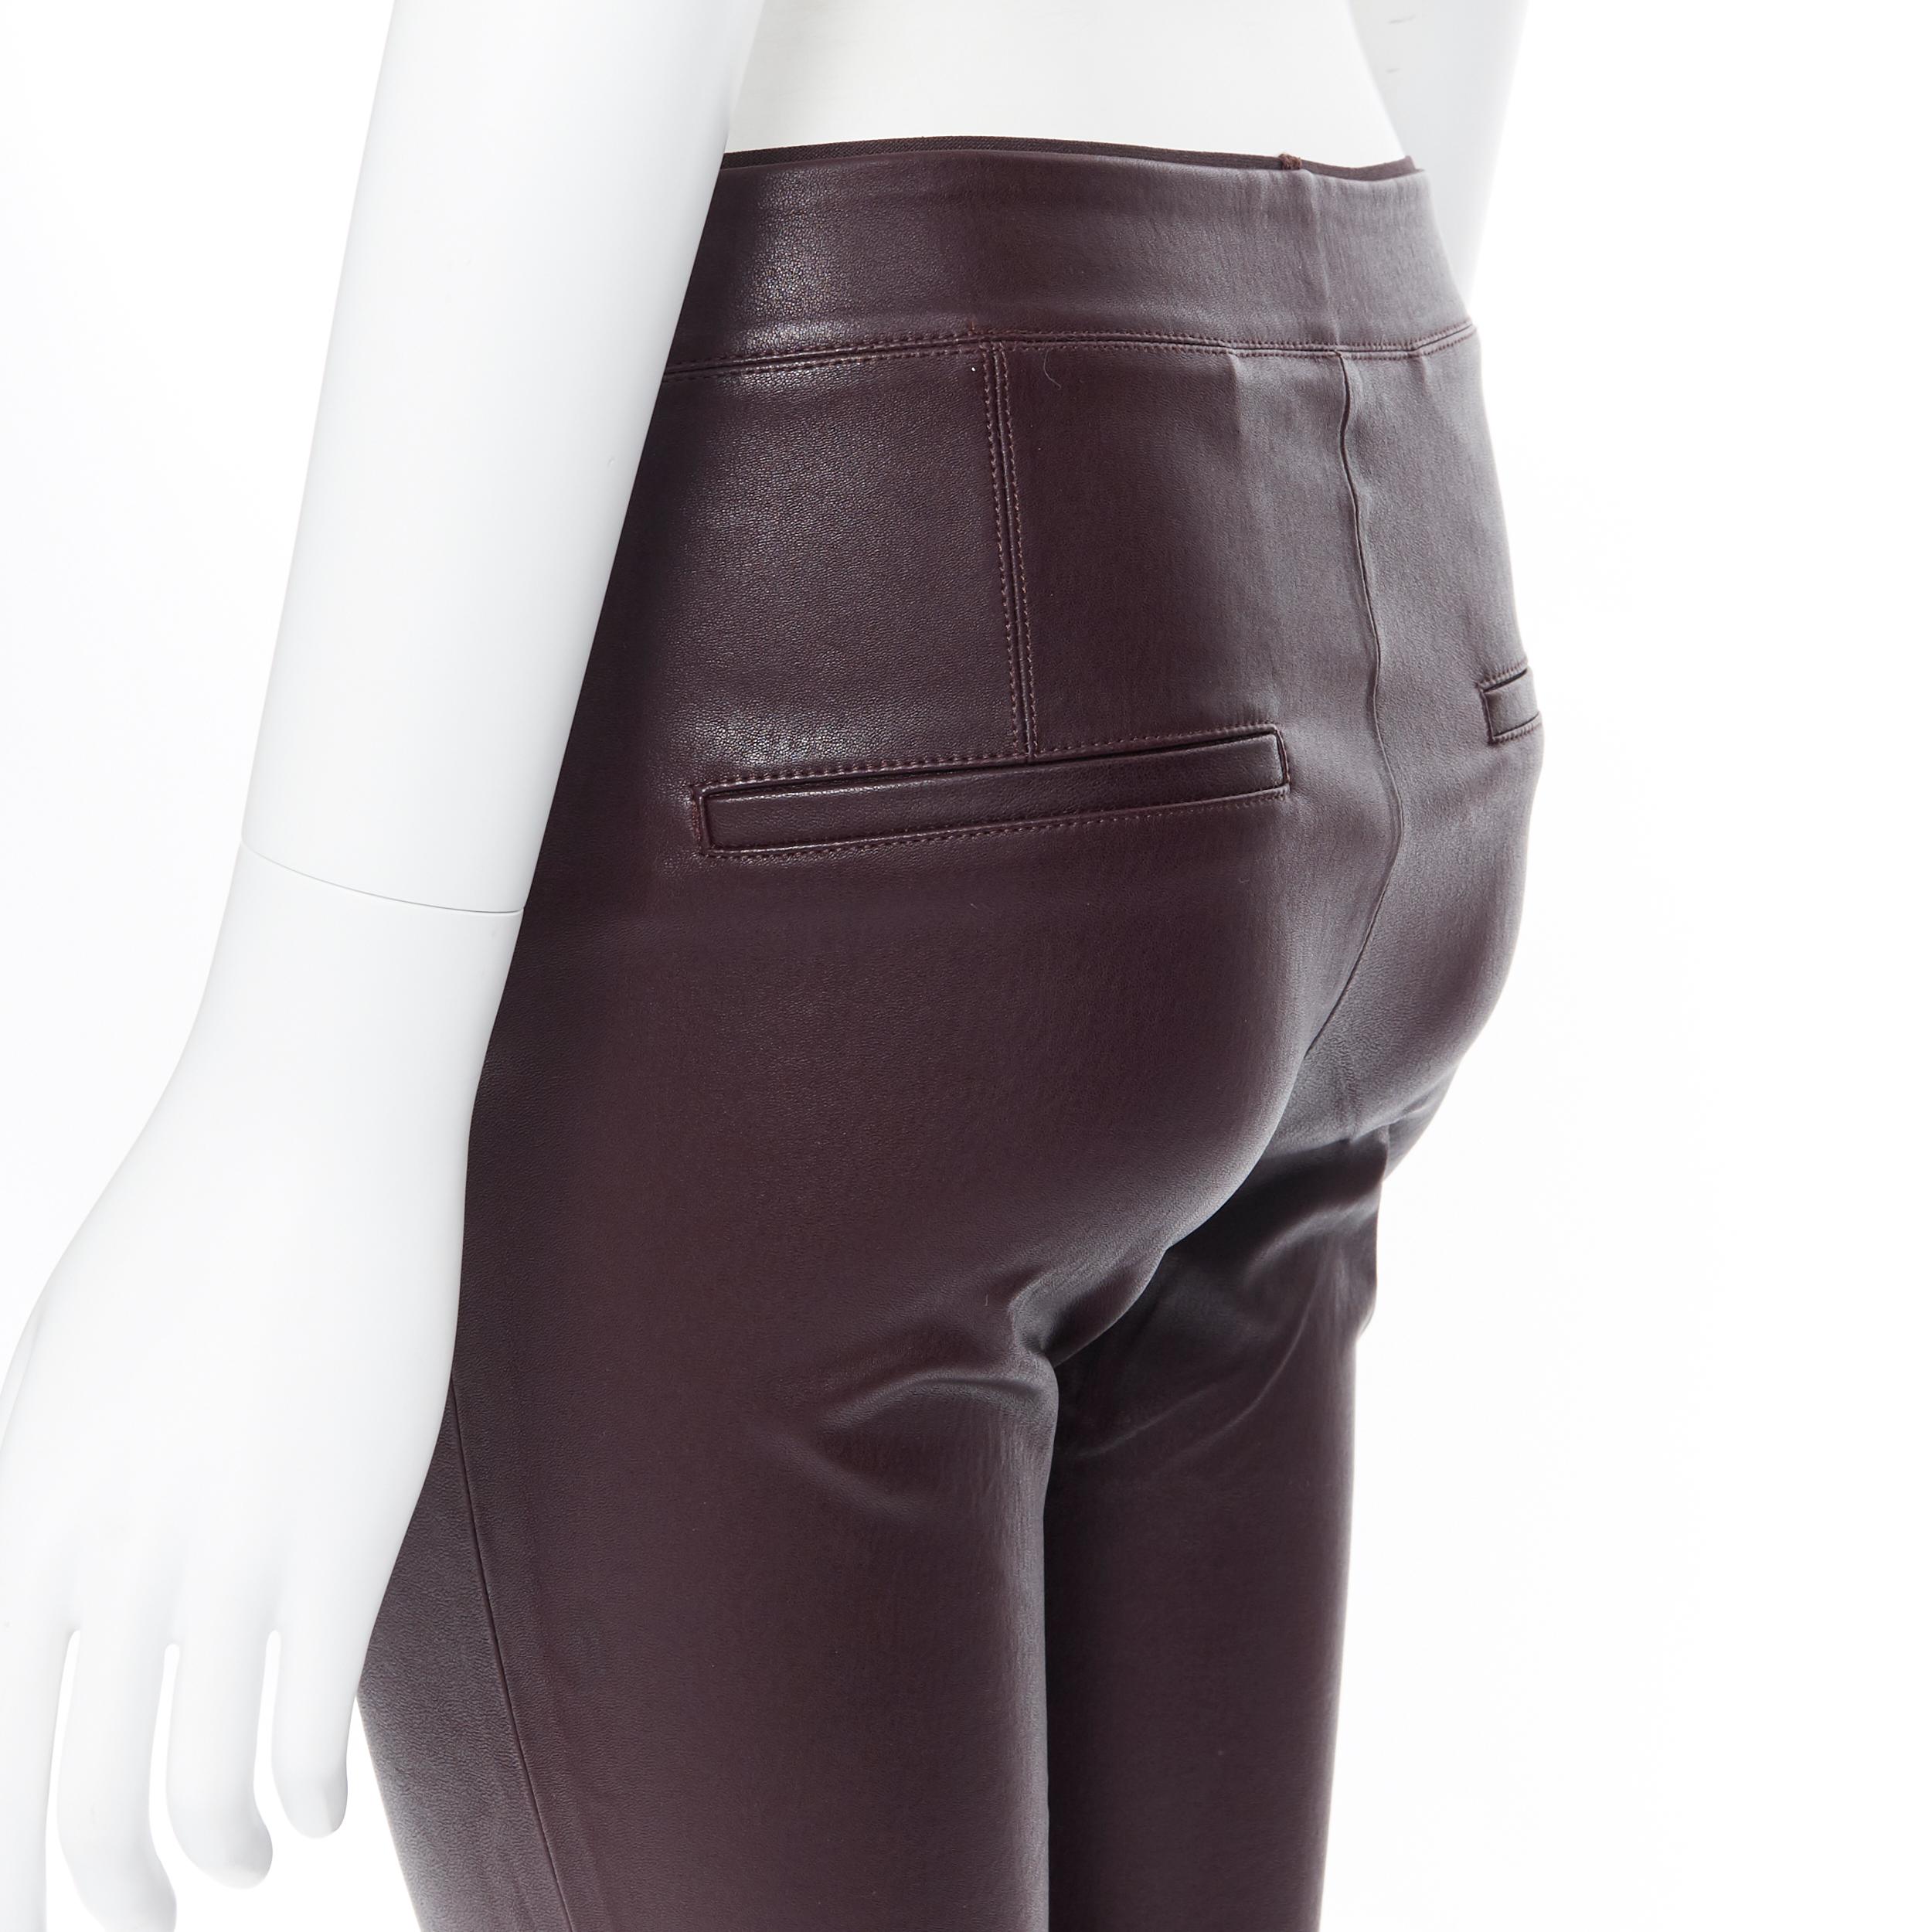 HELMUT LANG 100% leather dark burgundy minimal stretchy skinny leg pants XS
Brand: Vince
Model Name / Style: Leather legging
Material: Leather
Color: Burgundy
Pattern: Solid
Extra Detail: Minimalist stretch leather leggings. Mid rise. Skinny